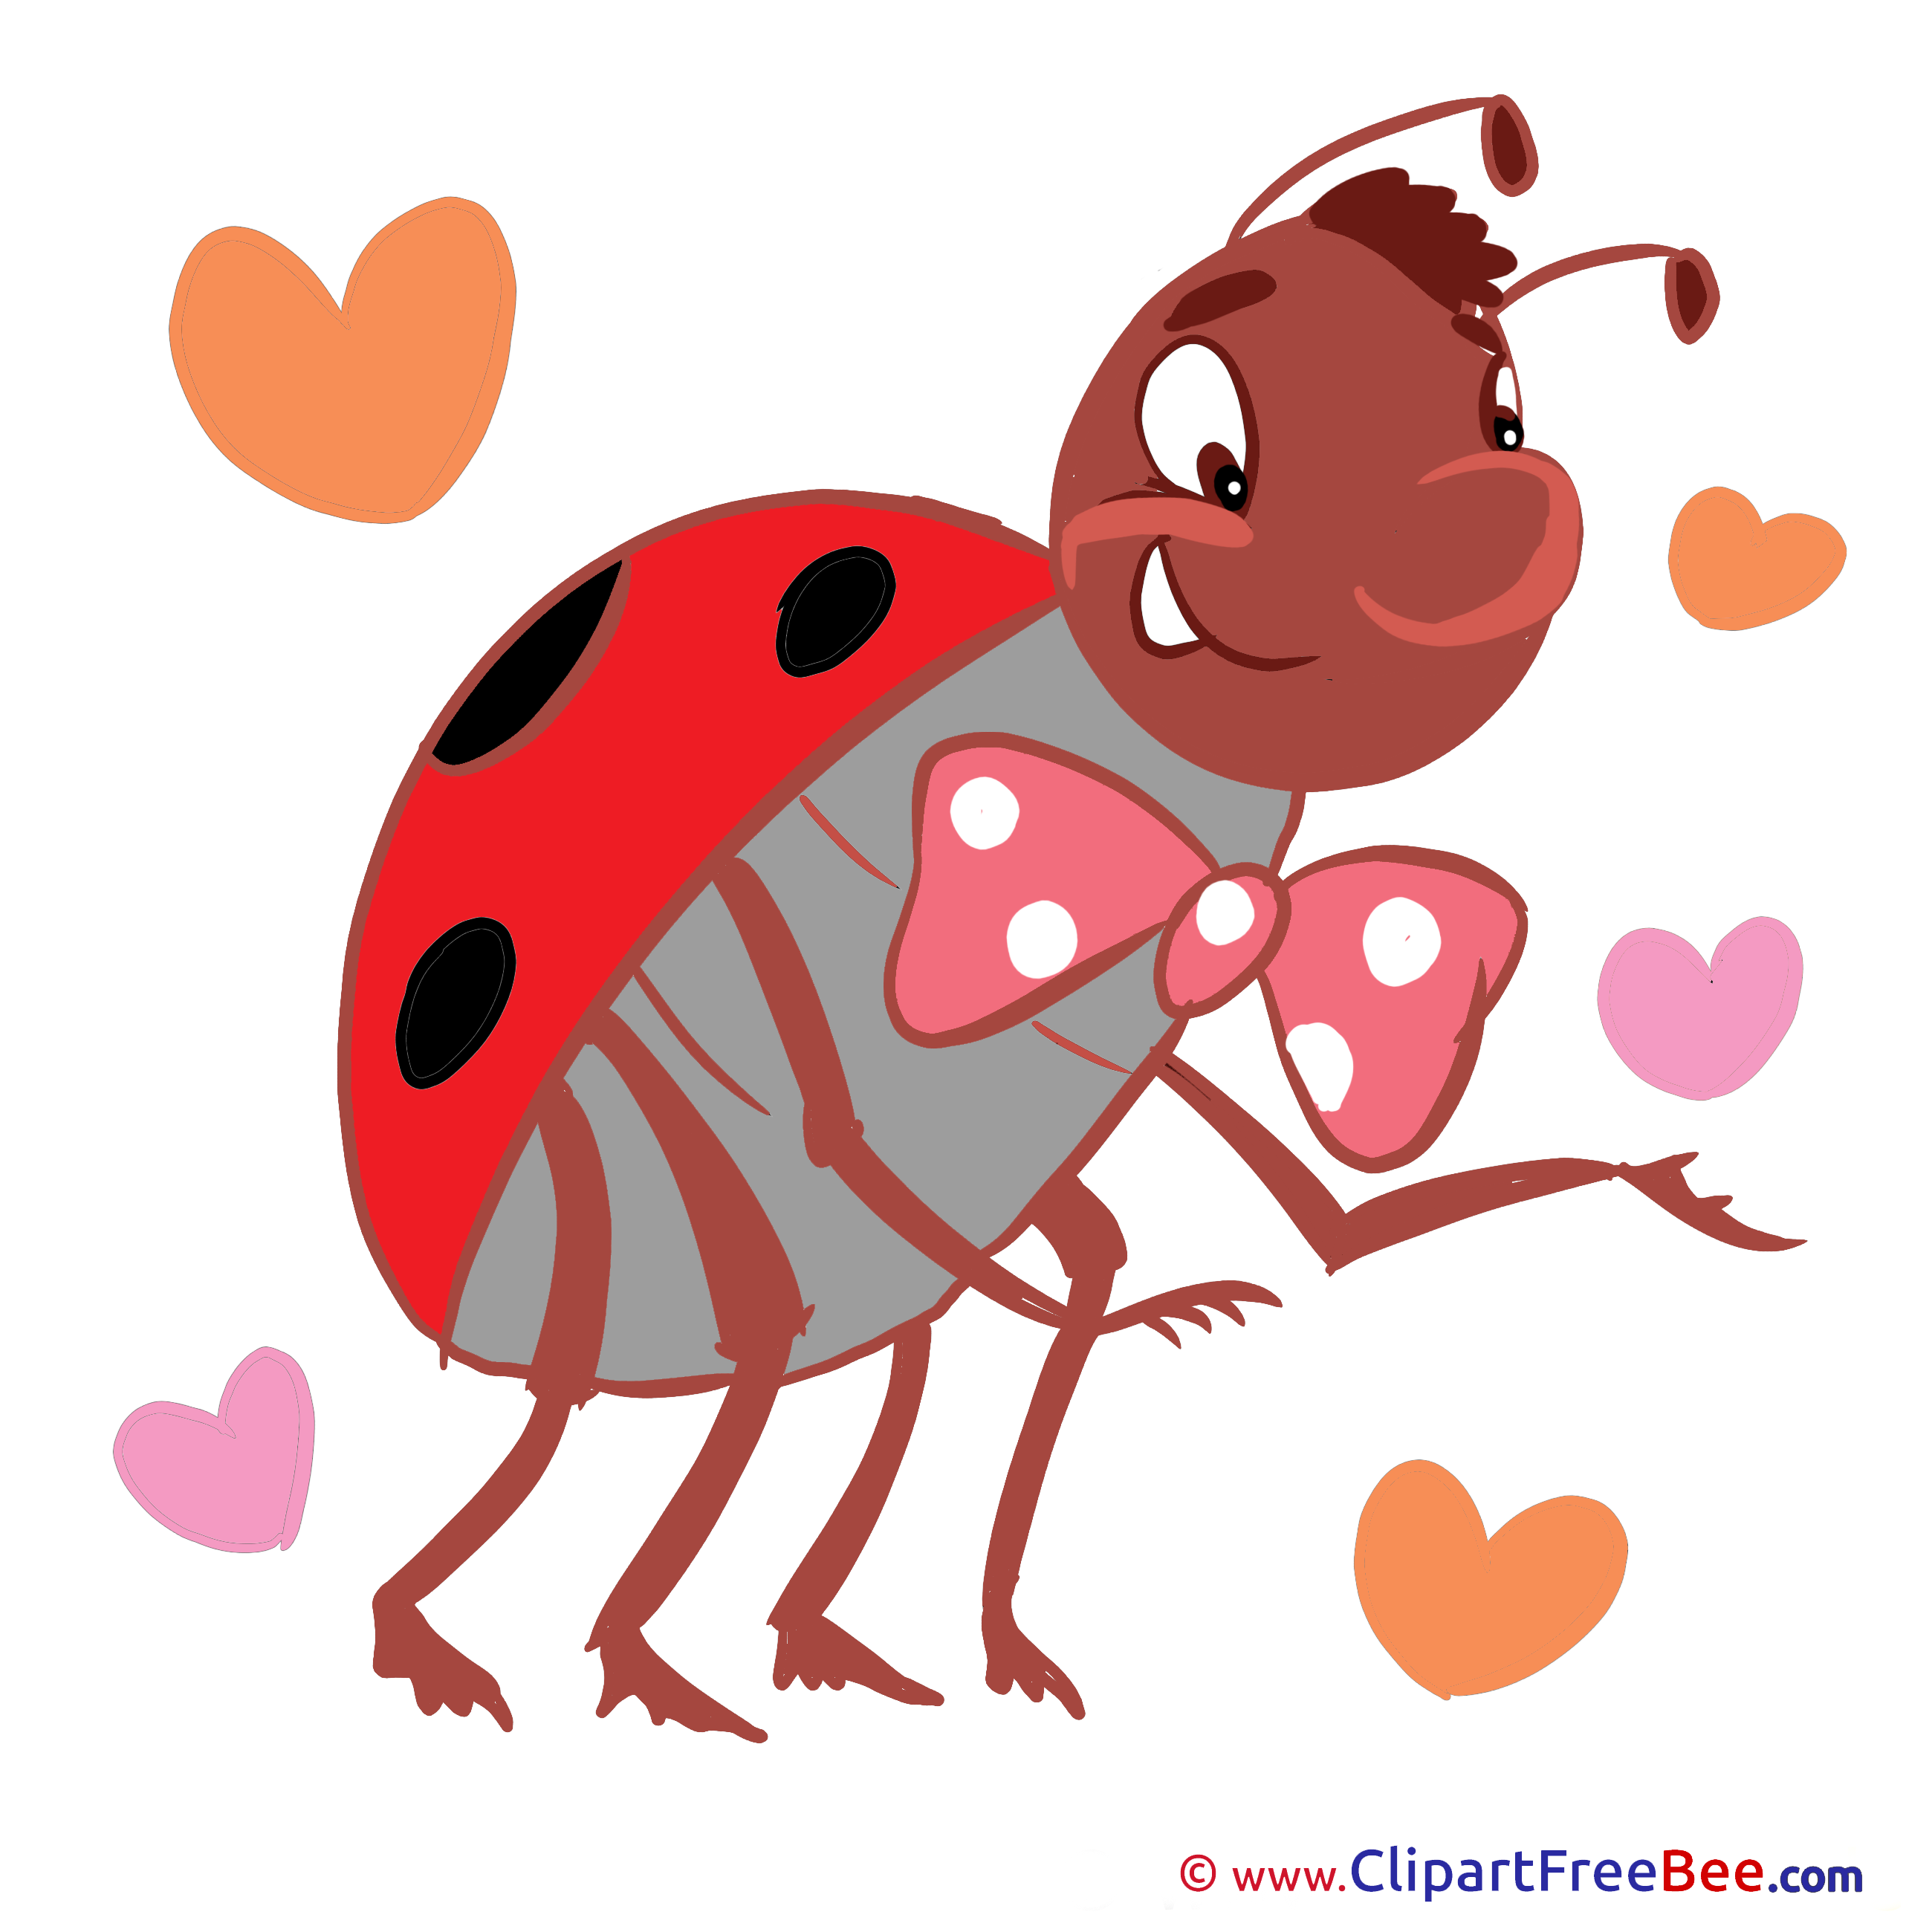 Ladybug Hearts Clip Art download for free